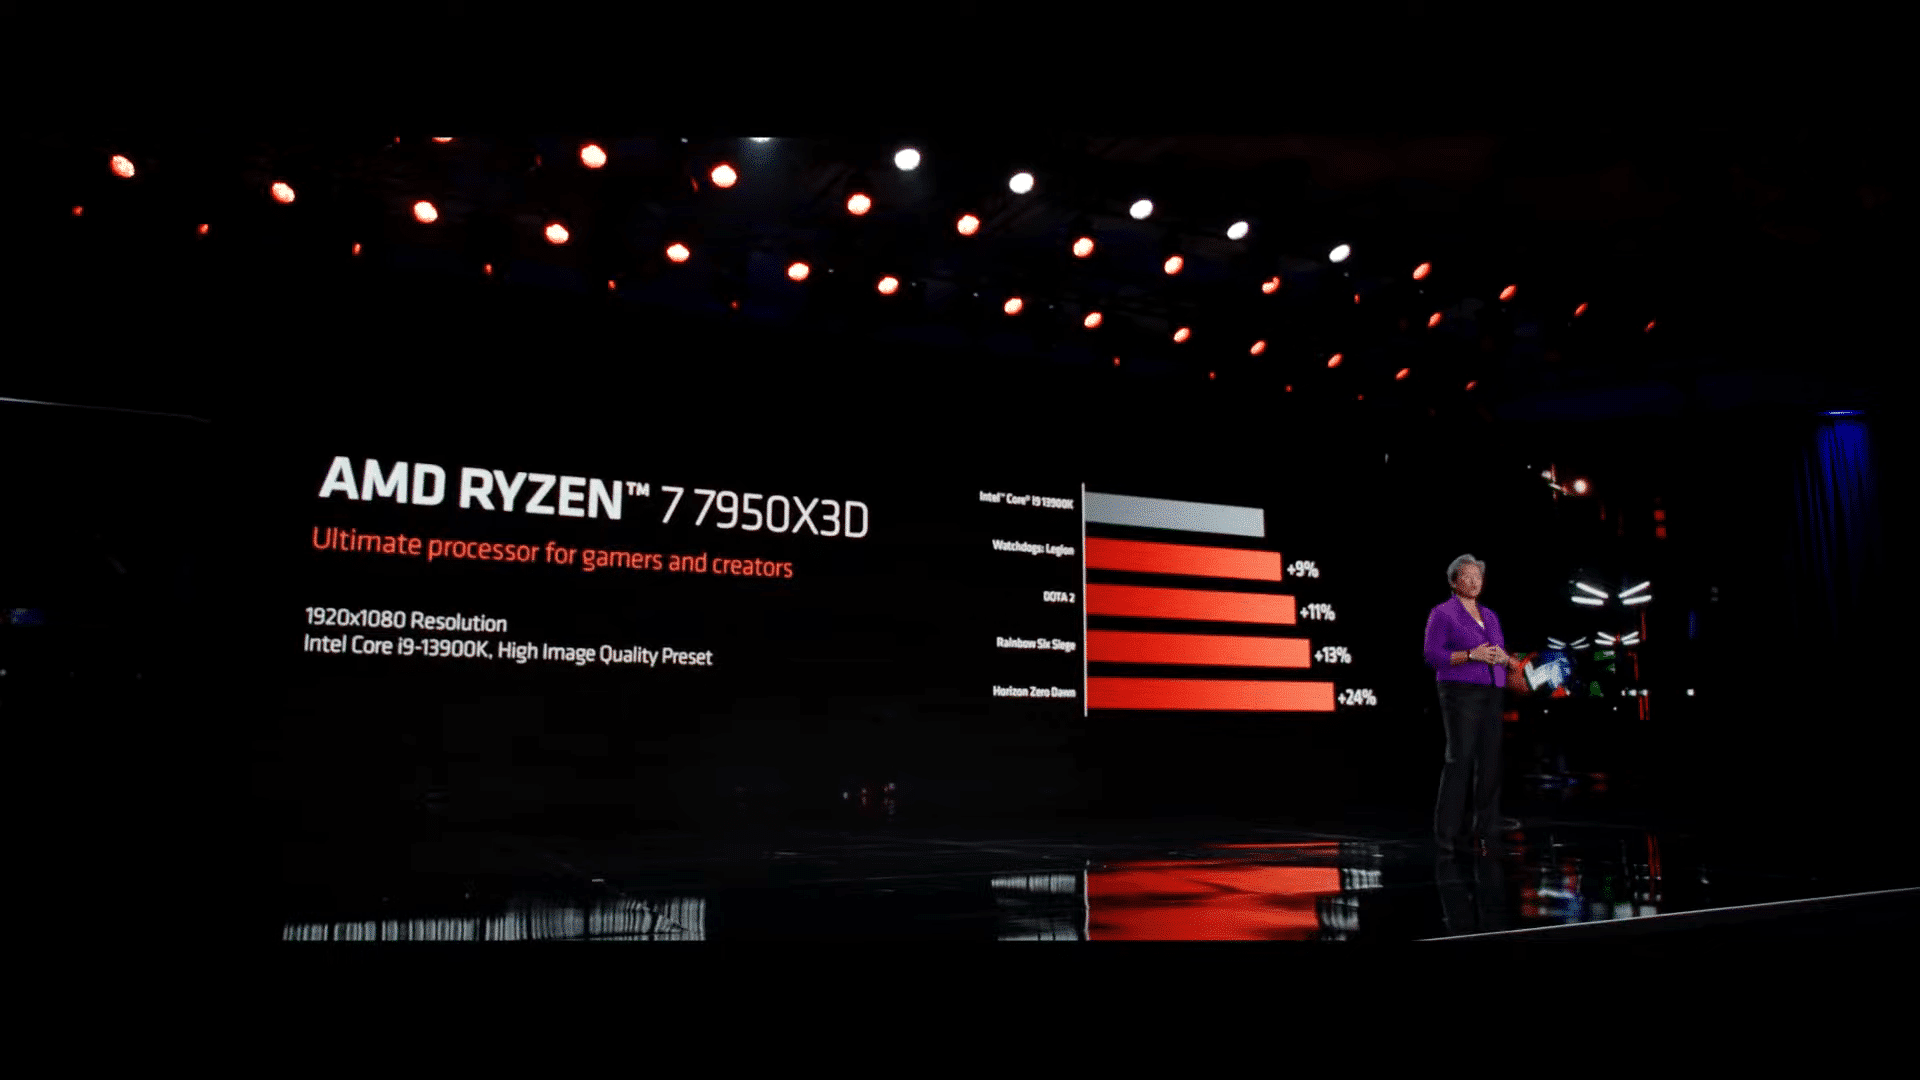 AMD Ryzen 7000X3D Series Launches on Valentine's Day (Update: AMD Confirms Mistake) 24